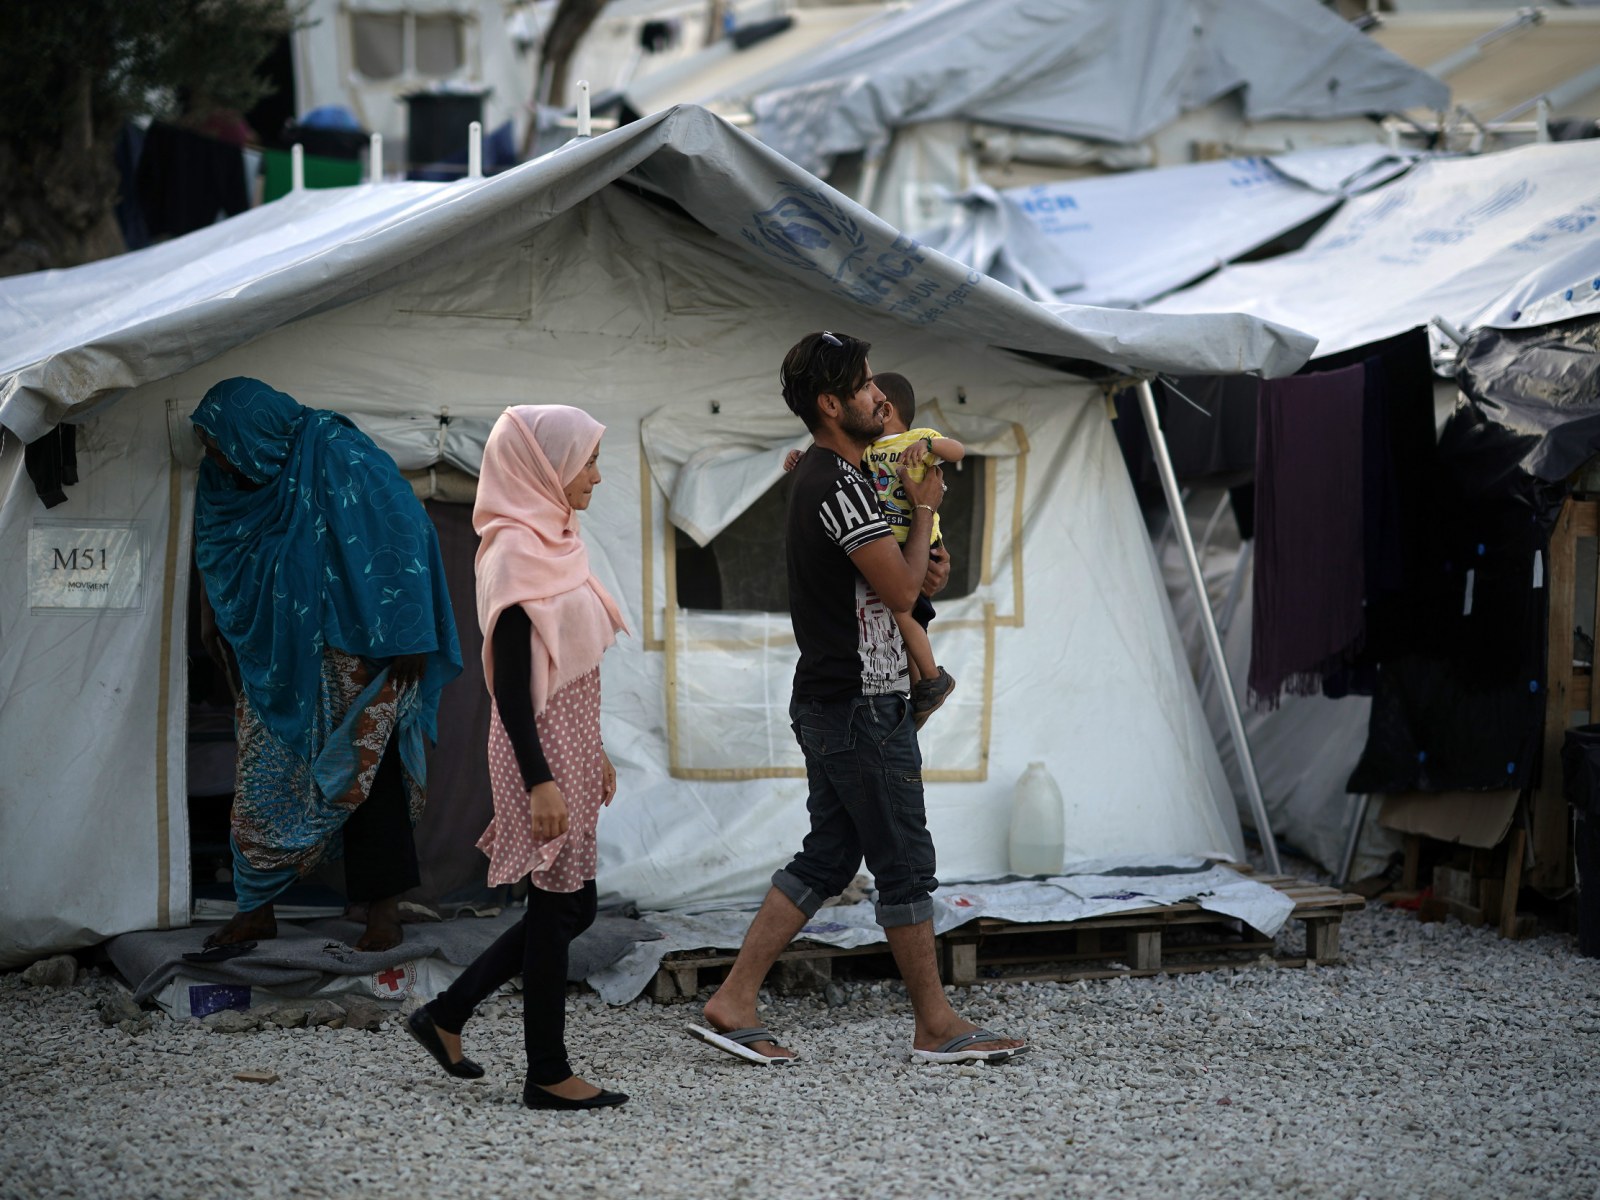 GREECE TO SHUT DOWN OVERCROWDED REFUGEE CAMPS AND REPLACE THEM WITH ‘DETENTION CENTERS’